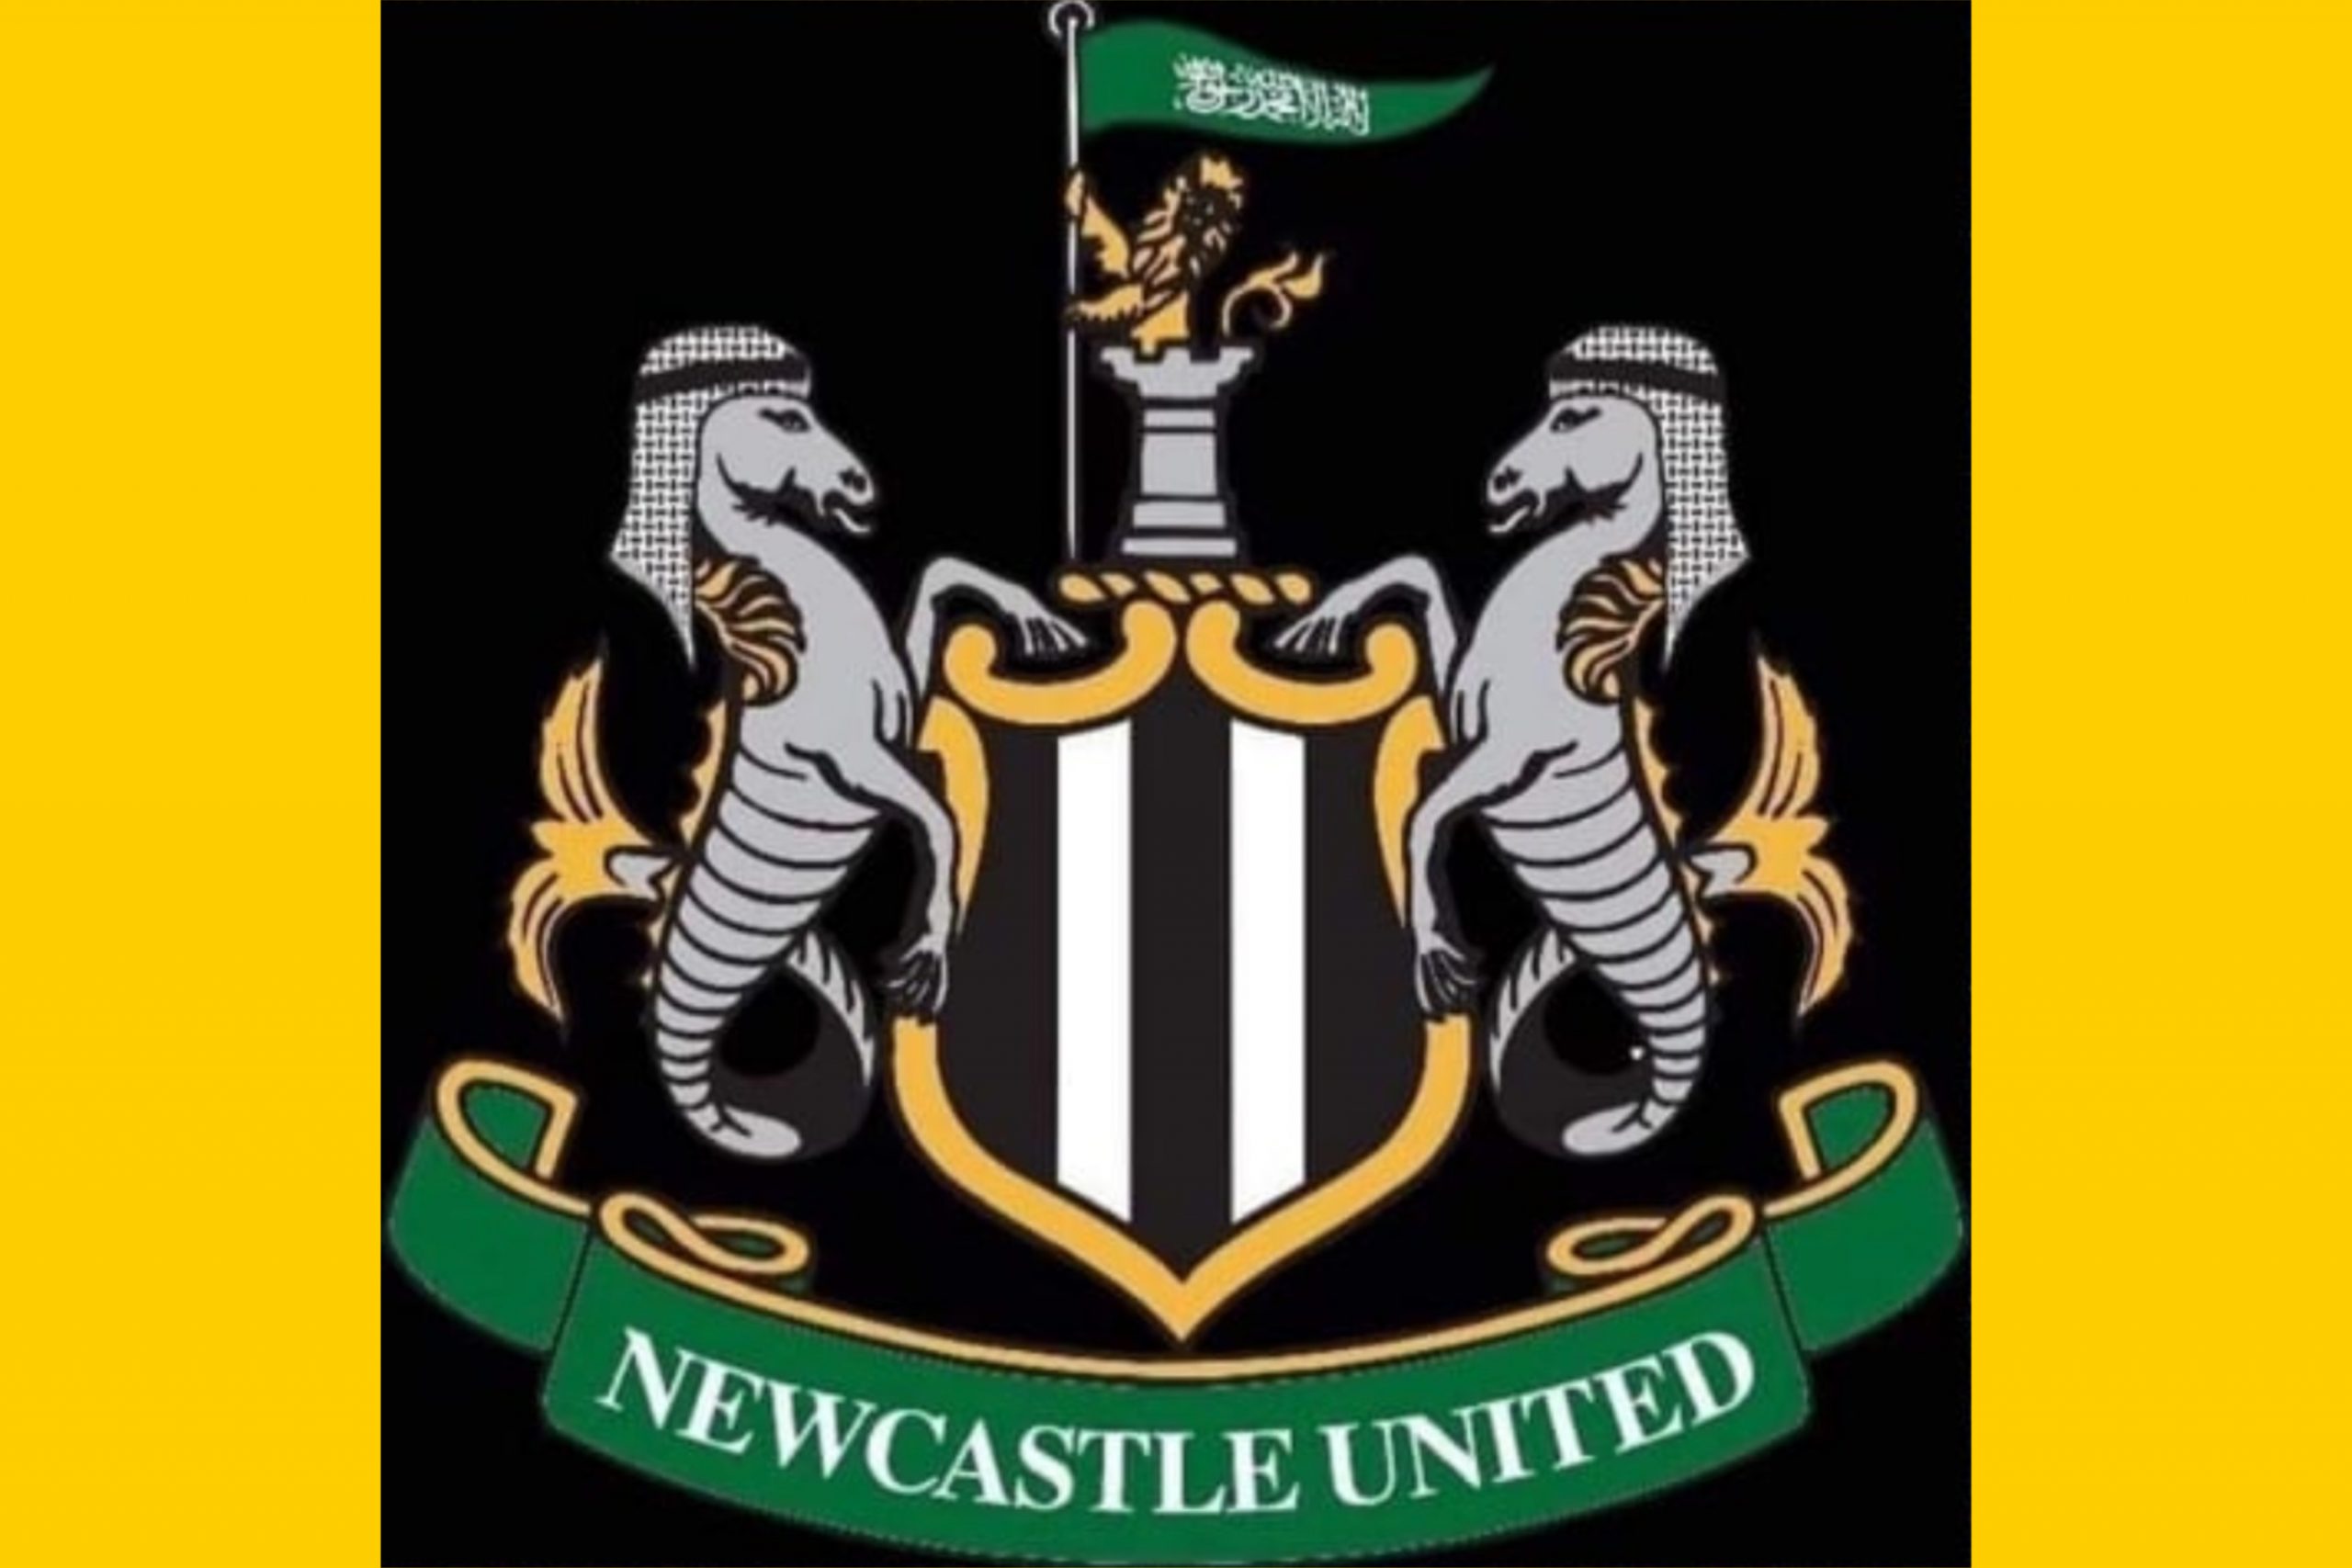 How Saudi sports channels are dropping subtle hints of a potential Newcastle United takeover